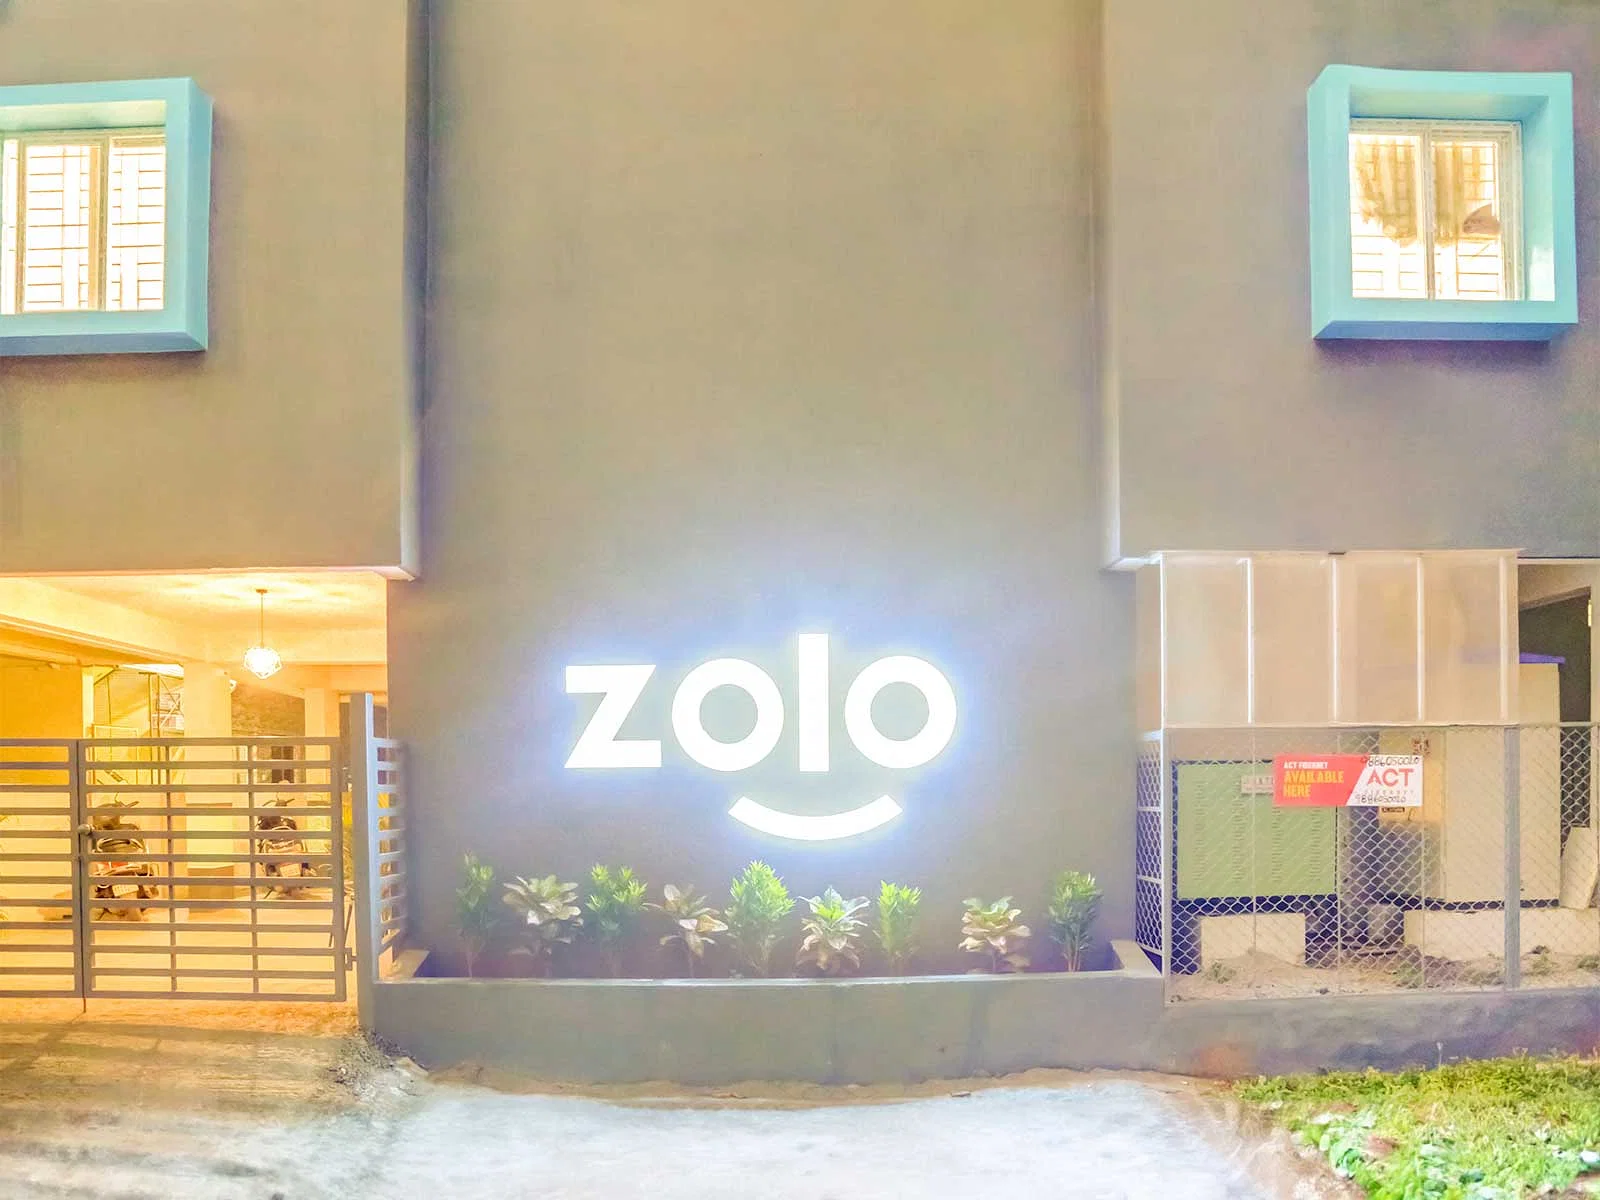 budget-friendly PGs and hostels for men and women with single rooms with daily hopusekeeping-Zolo Unico